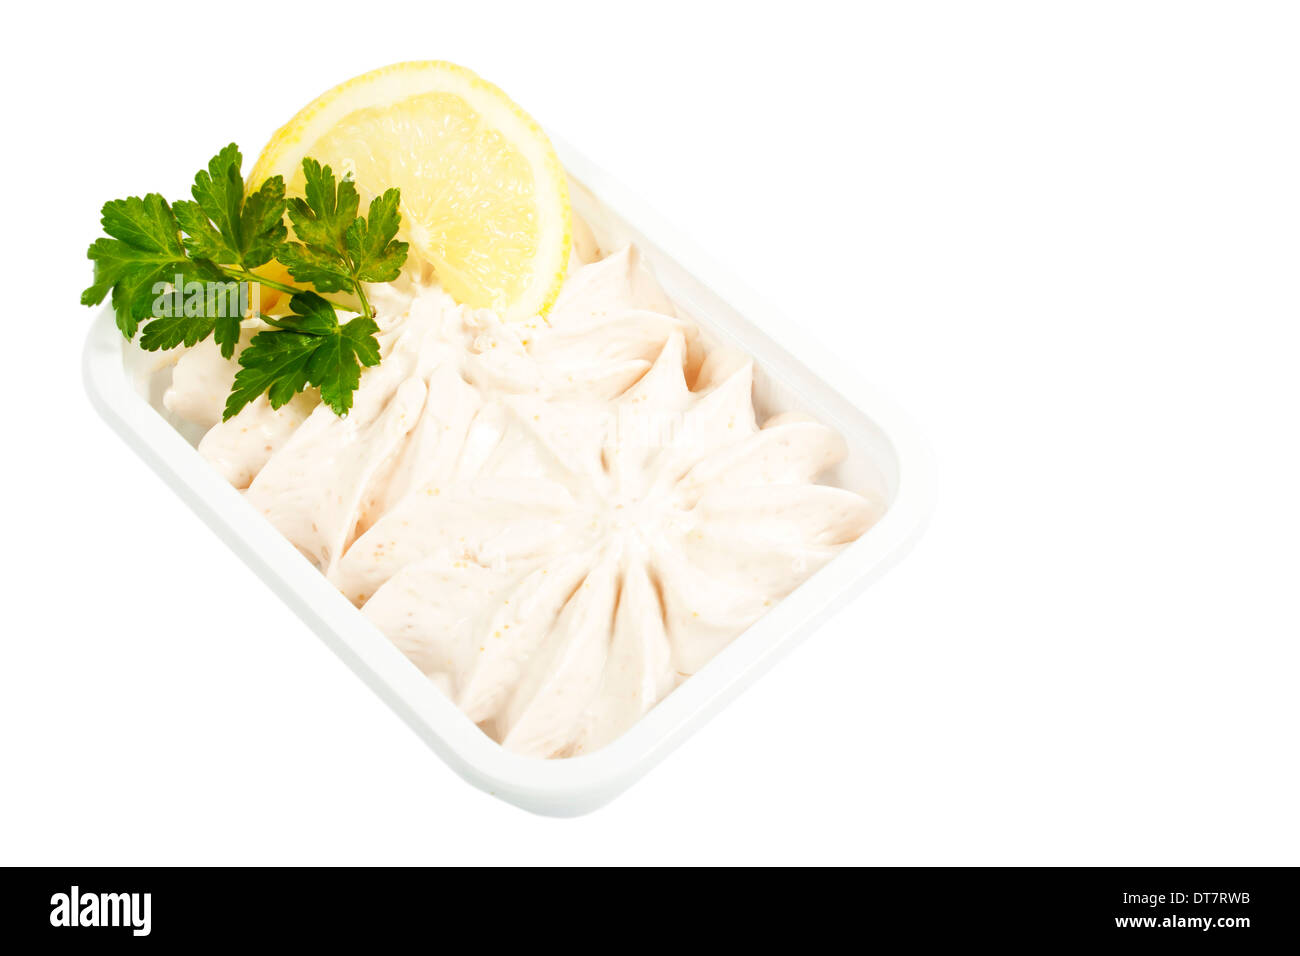 Roe with parsley and lemon isolated on white background with clipping path Stock Photo